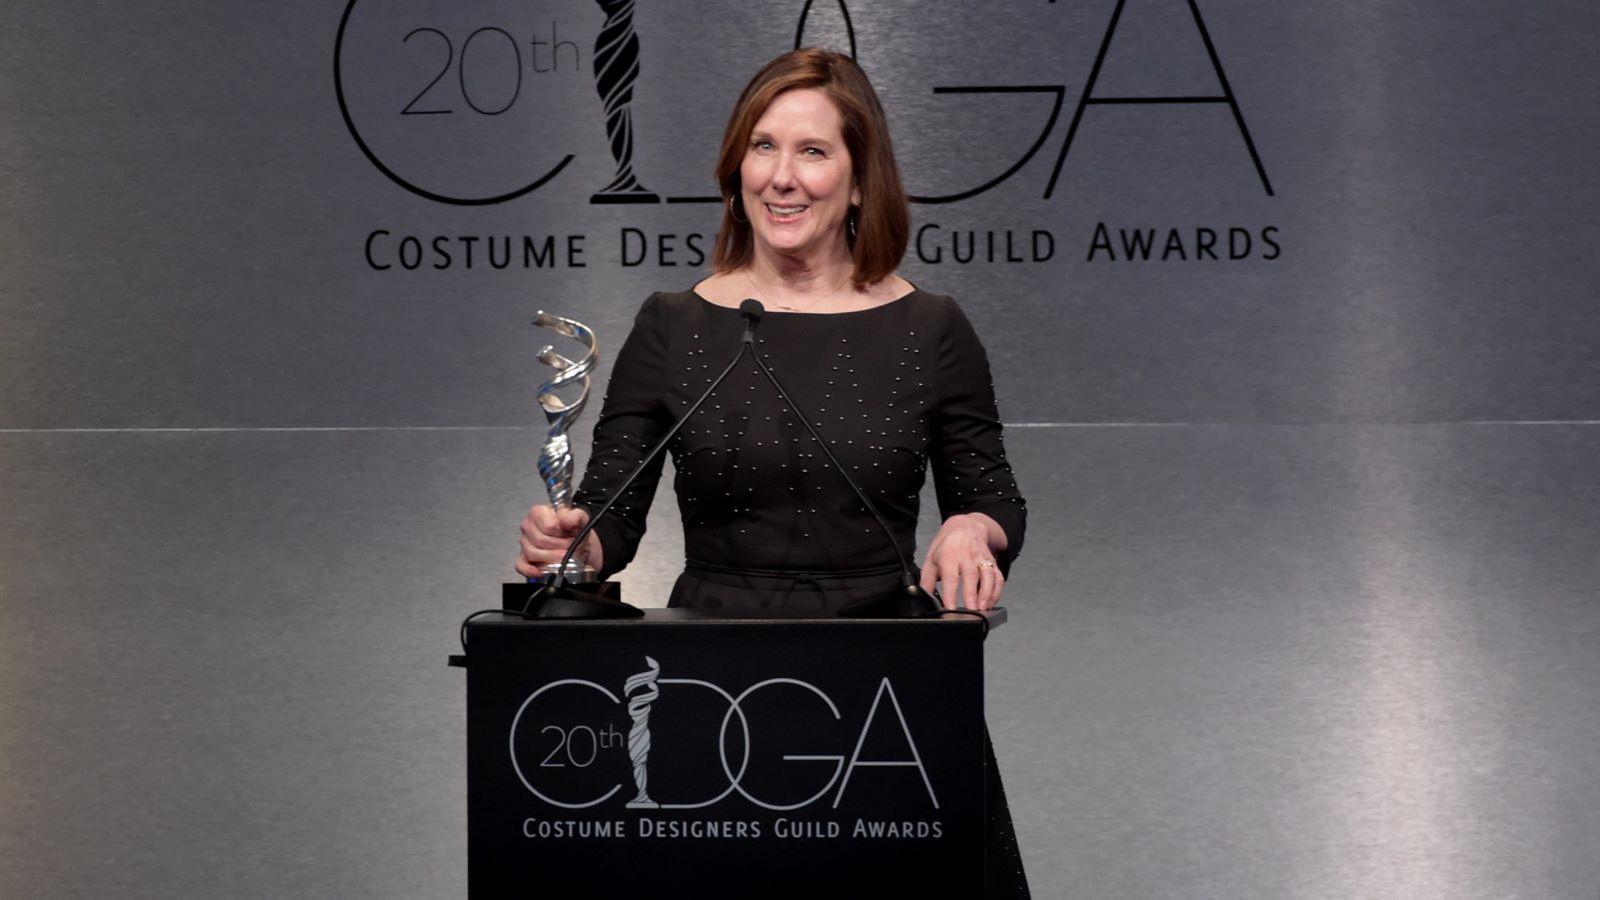 Producer Kathleen Kennedy speaks onstage during the Costume Designers Guild Awards at The Beverly Hilton Hotel on February 20, 2018 in Beverly Hills, California. (Photo by Kevin Winter/Getty Images)